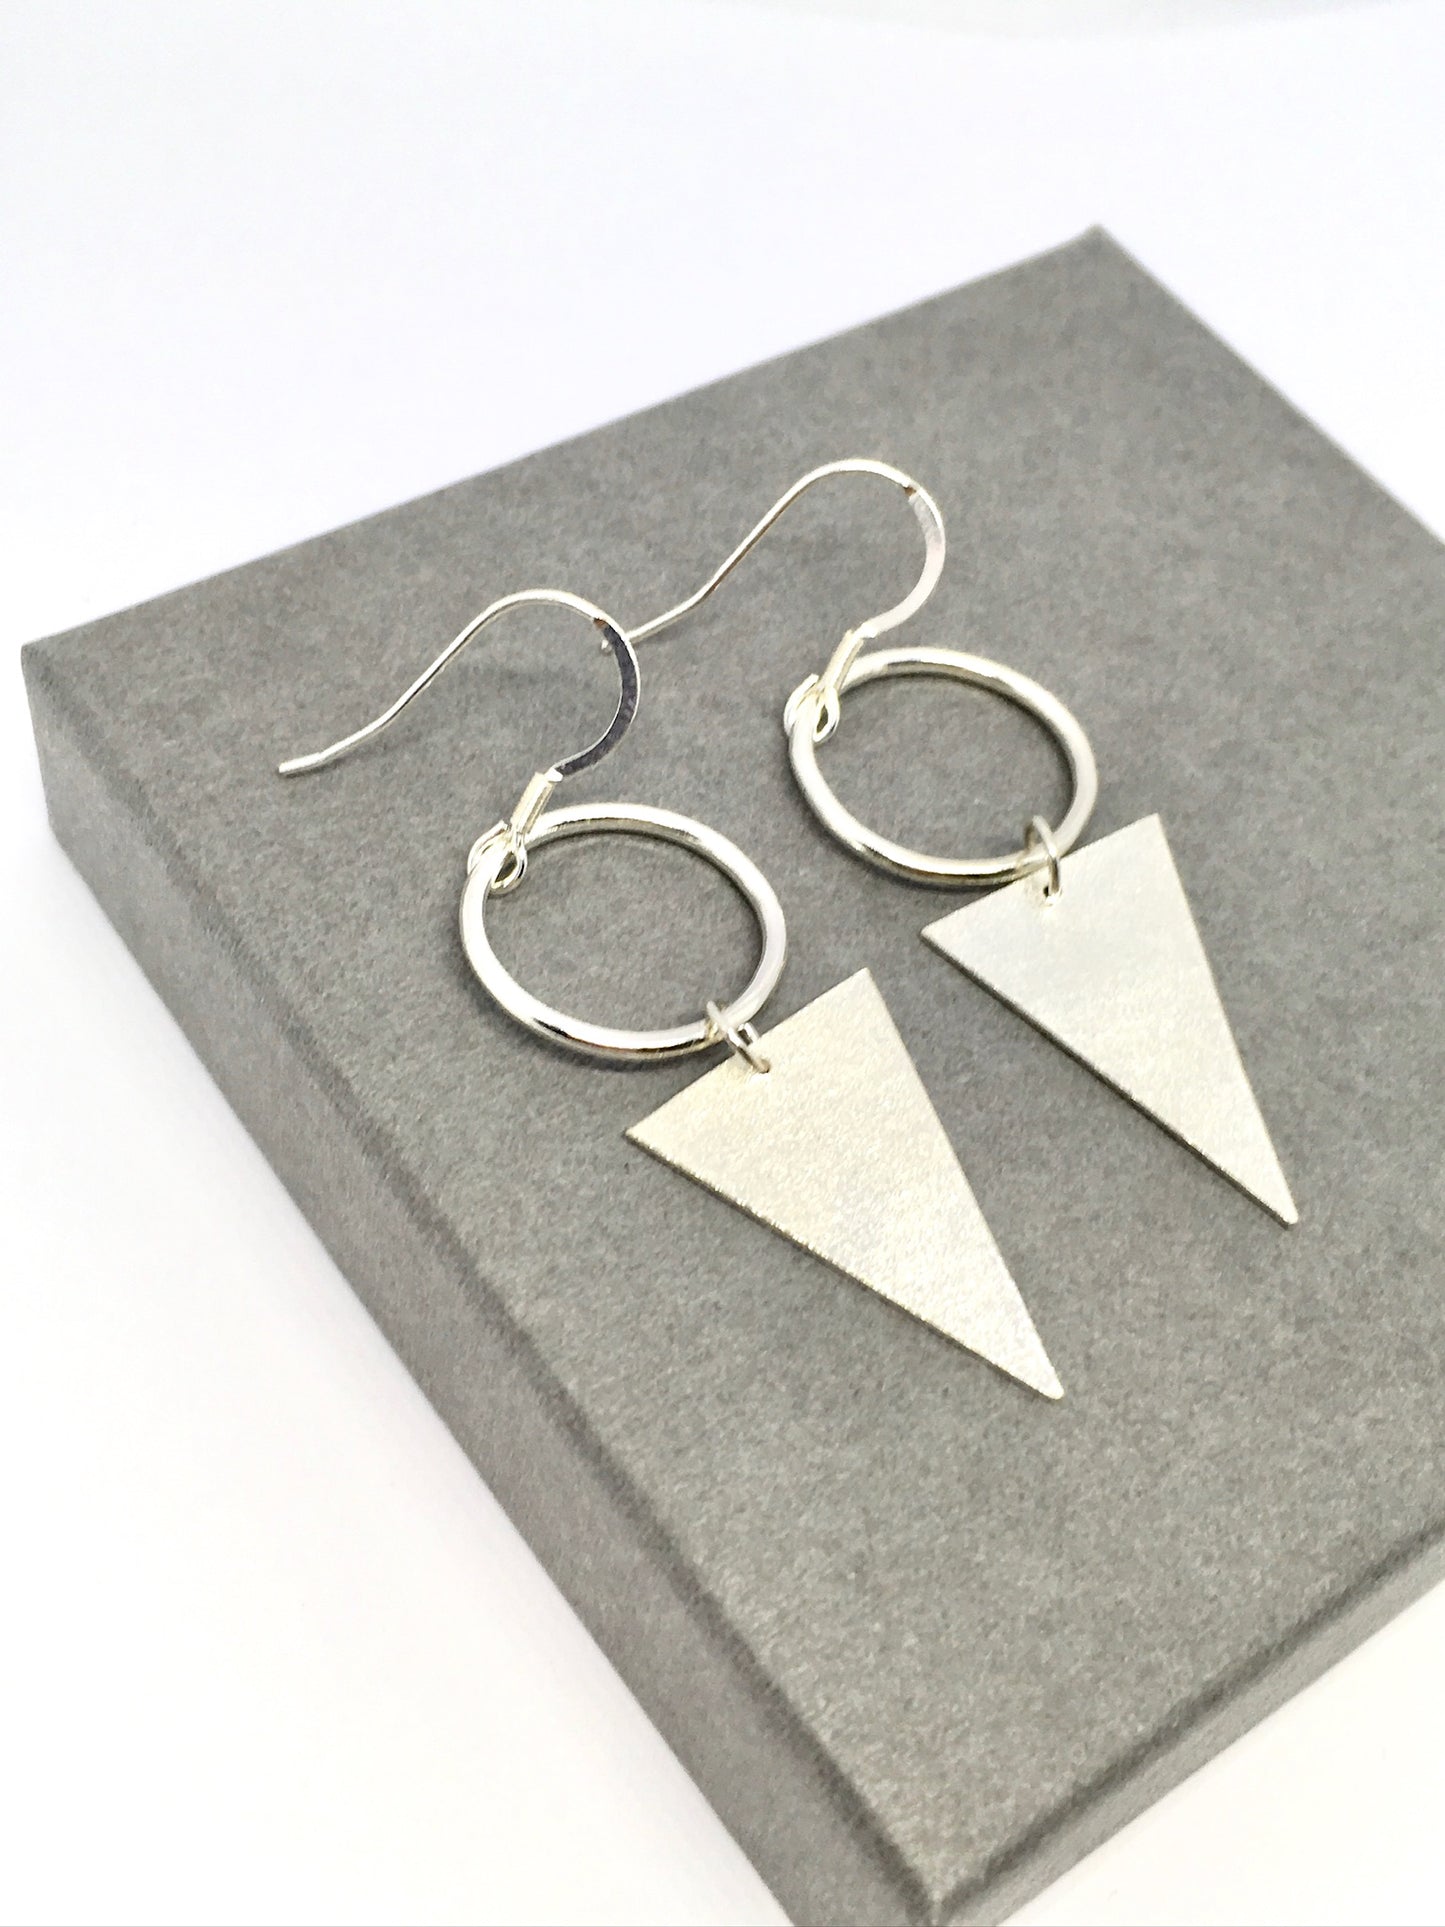 Large geometric silver earrings, silver circle and triangle earrings